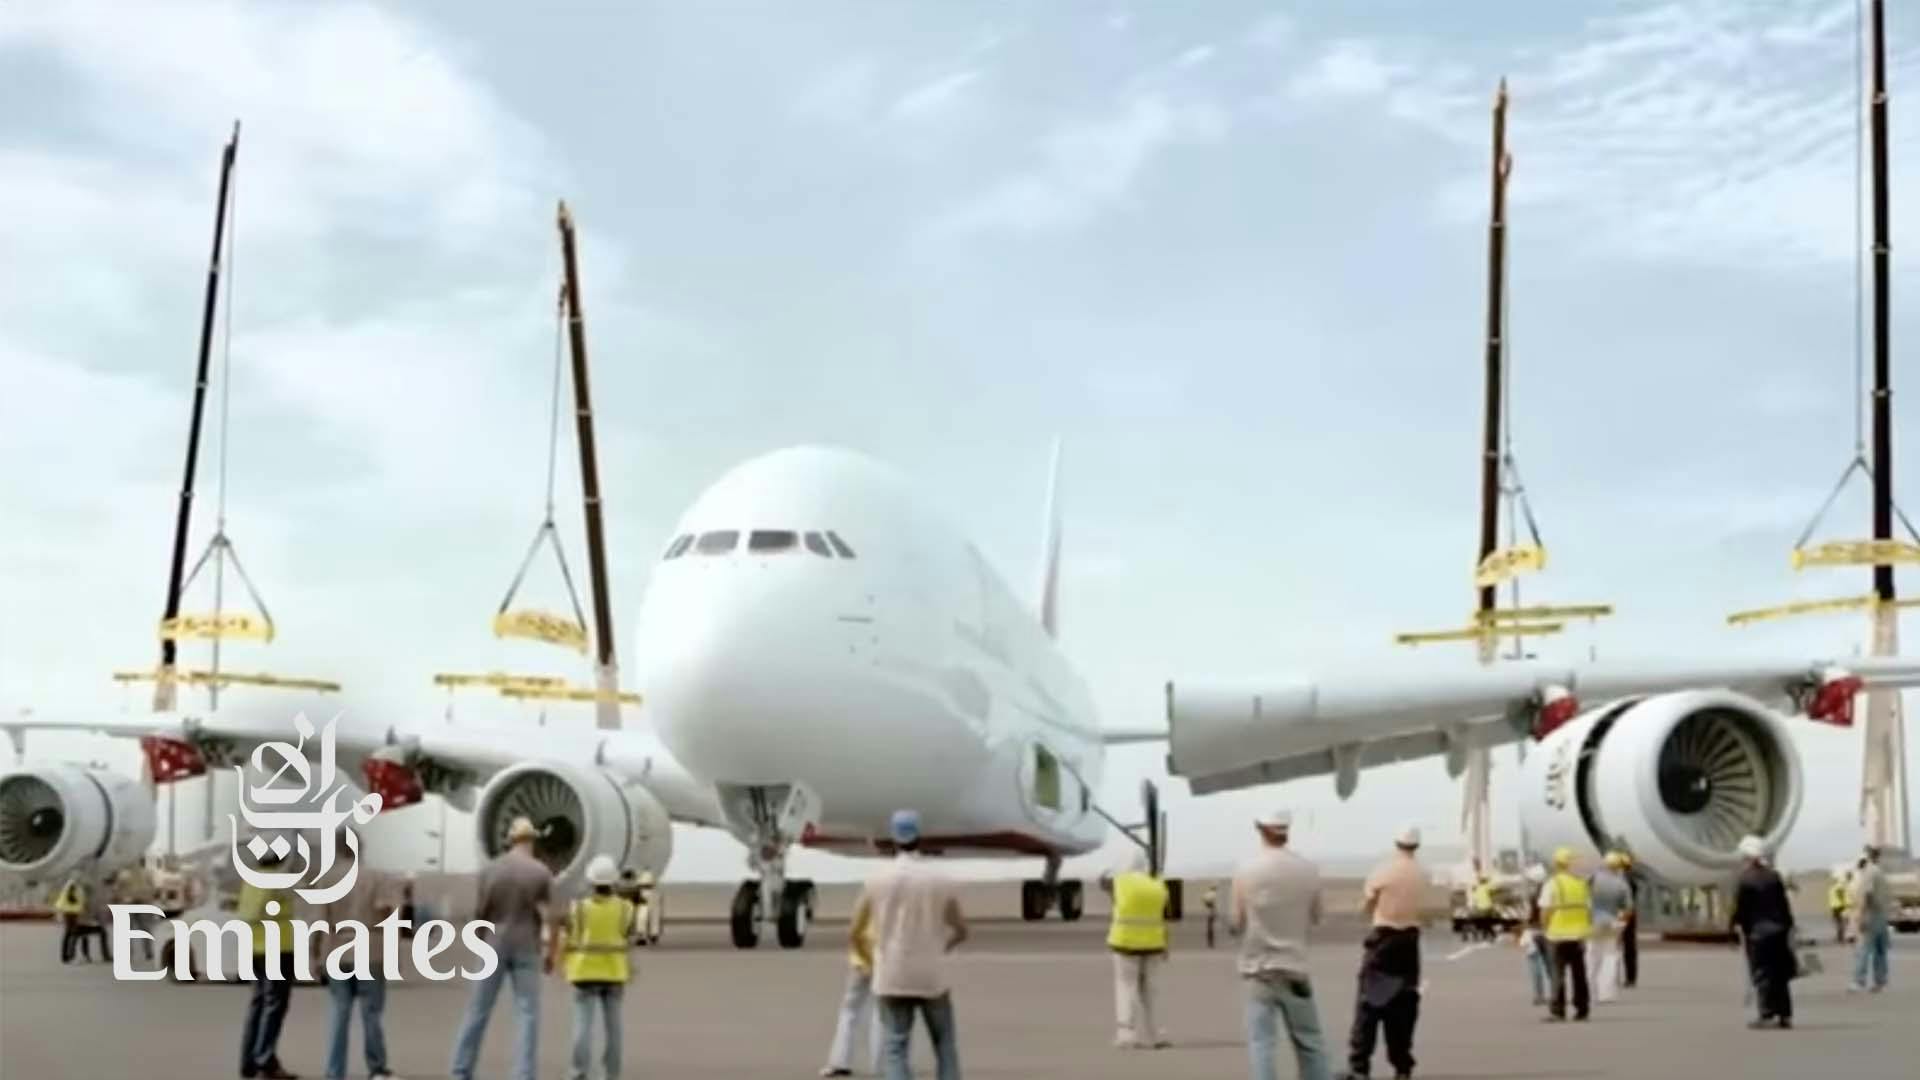 Screen grab from the Emirates case study of airport ramp agents facing a large white plane.